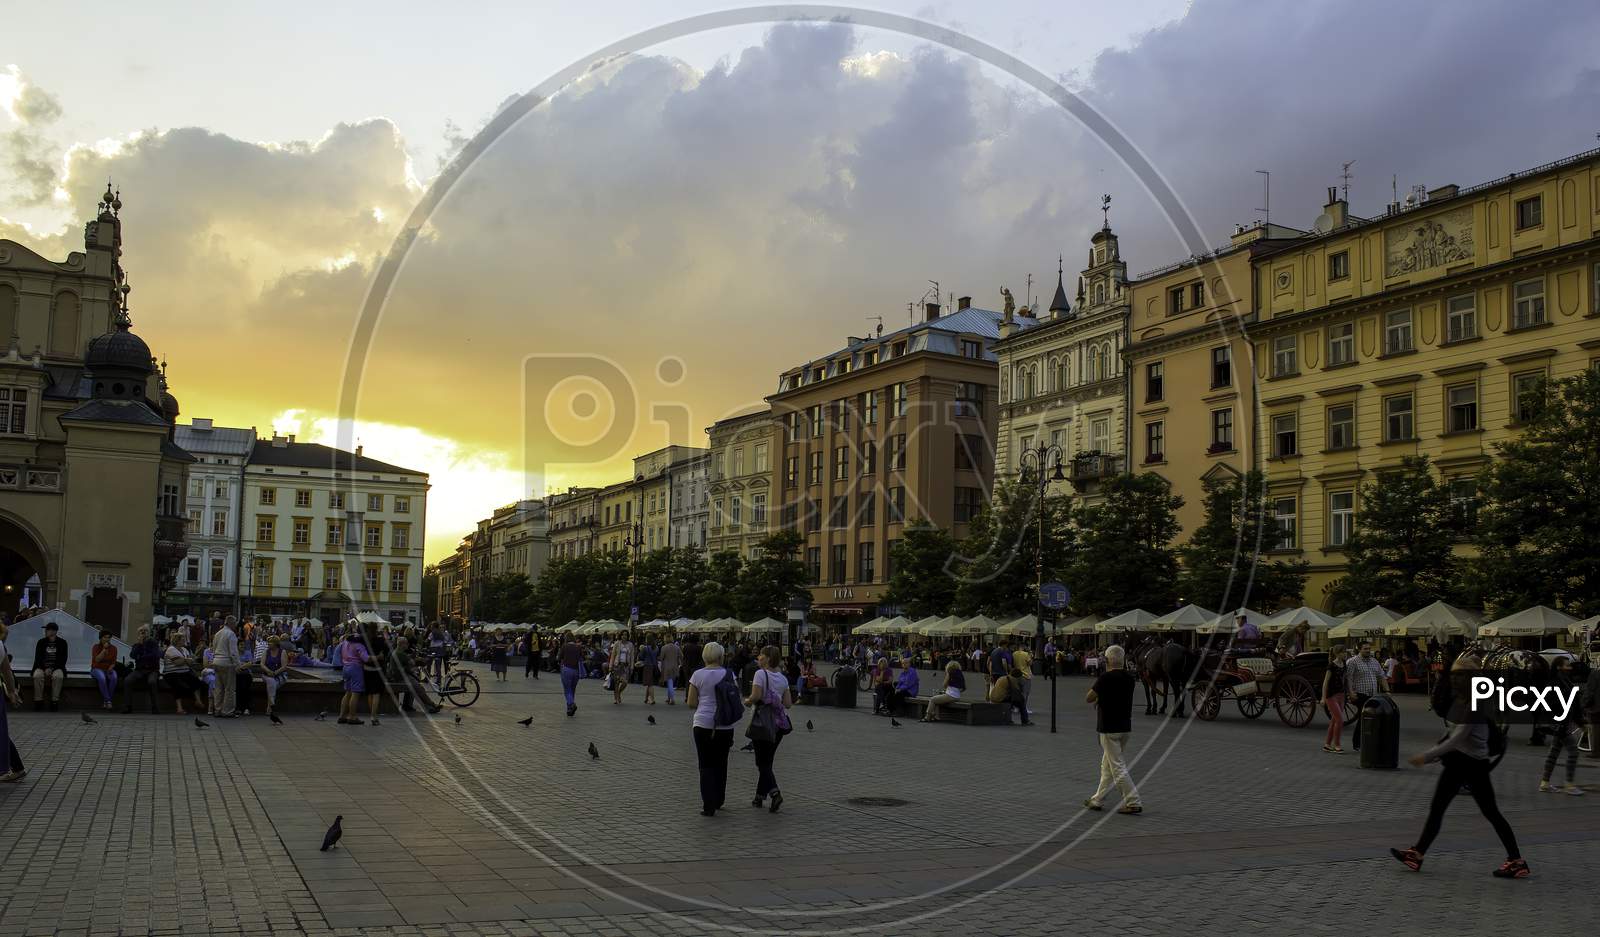 Krakow, Poland - May 23, 2014: A Street View Of Touristic Main Square At Sunset In The Center Of Krakow City In Poland